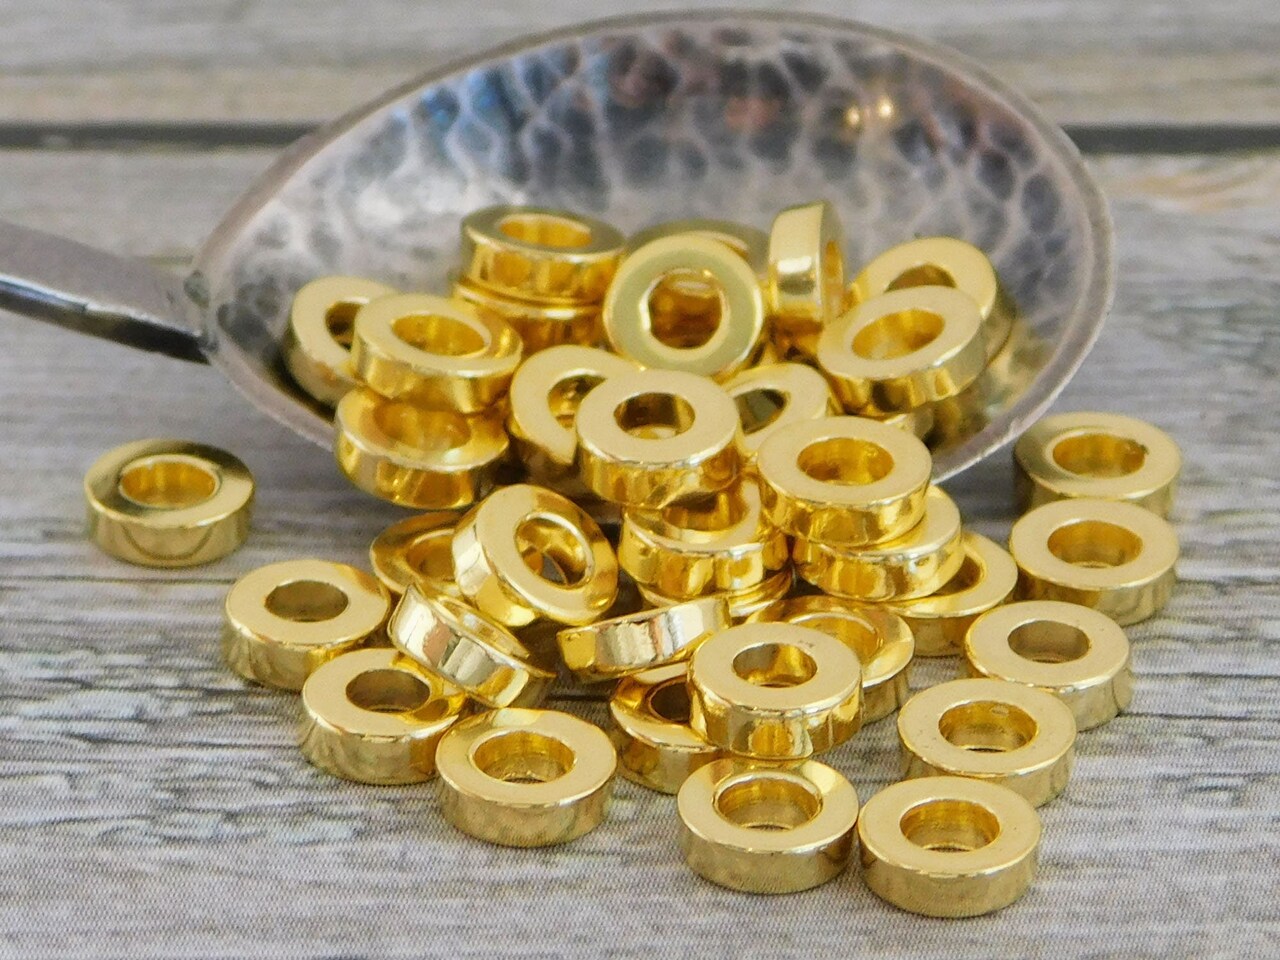 Metal Spacers - Gold Spacer Beads - Gold Spacers - Metal Beads - Spacer  Beads - 100pcs - 6x2mm - (1729)